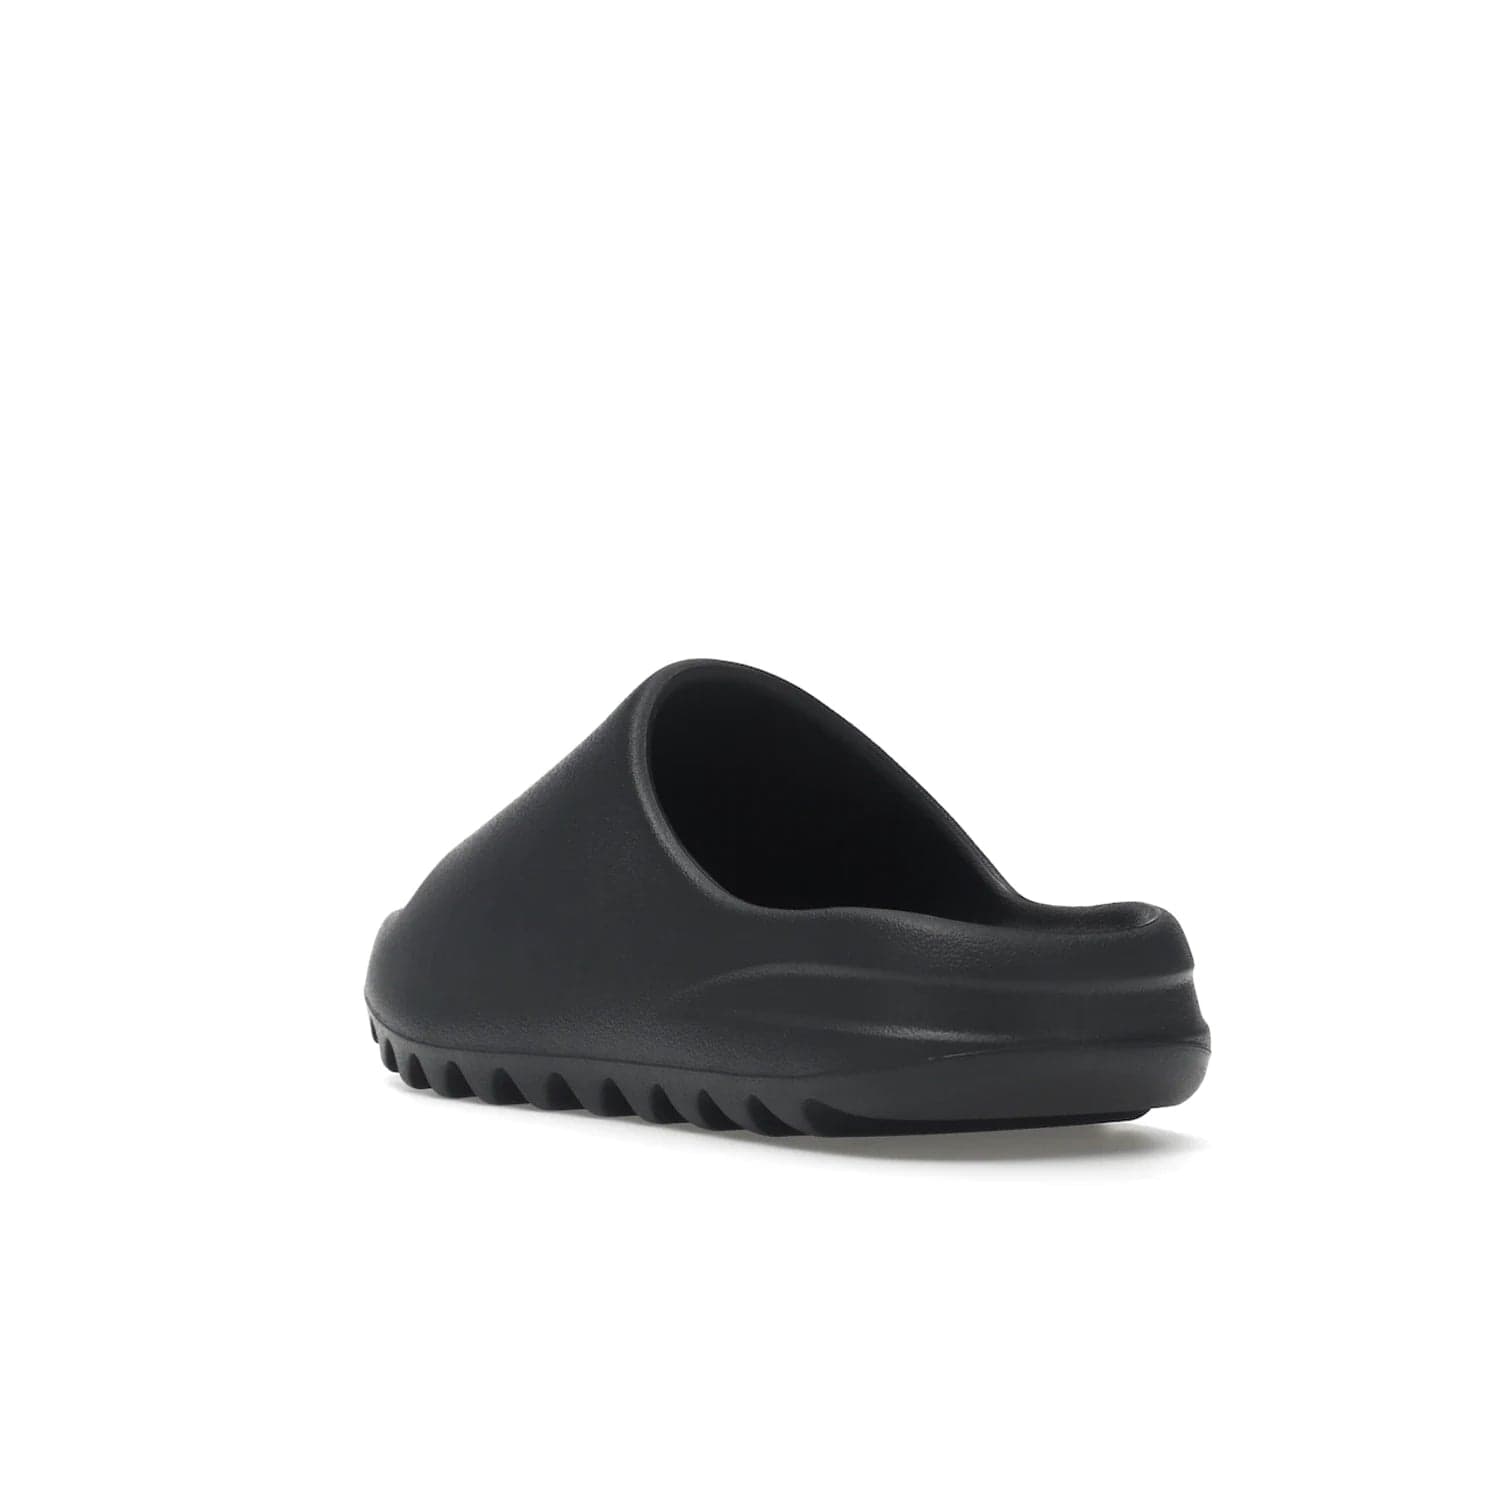 adidas Yeezy Slide Slate Grey - Image 25 - Only at www.BallersClubKickz.com - Stylish & comfortable adidas Yeezy Slide Slate Grey features an EVA foam upper, strategic cutouts, textured outsole pattern, & easy slip-on design for modern comfort & classic style.